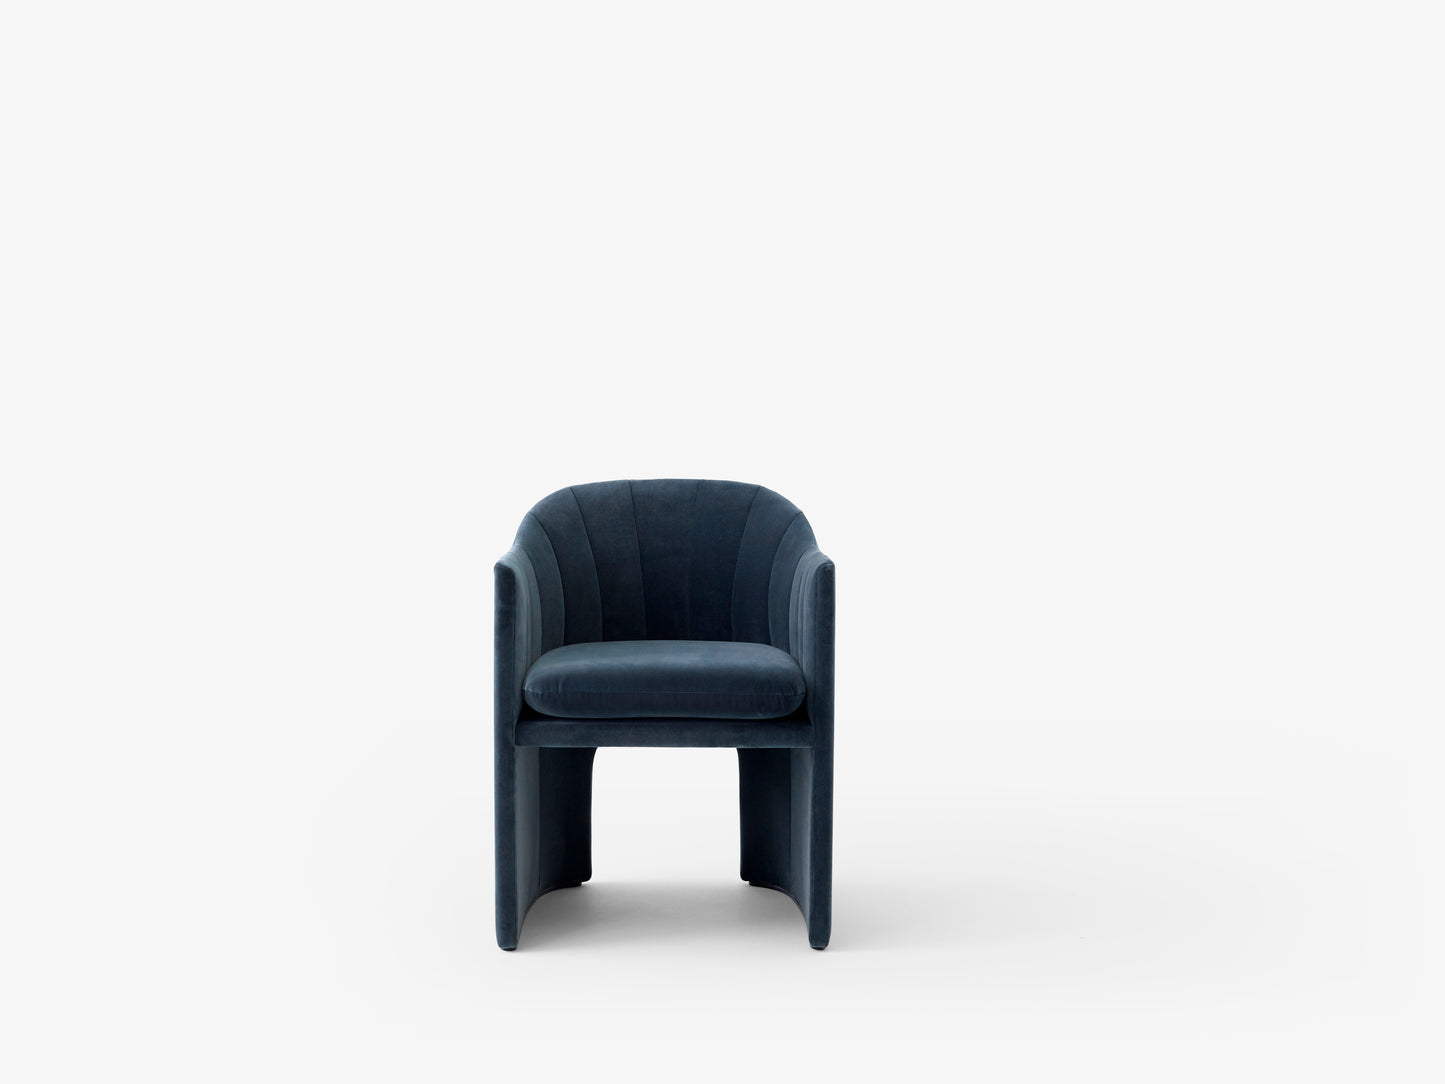 Loafer SC24 chair